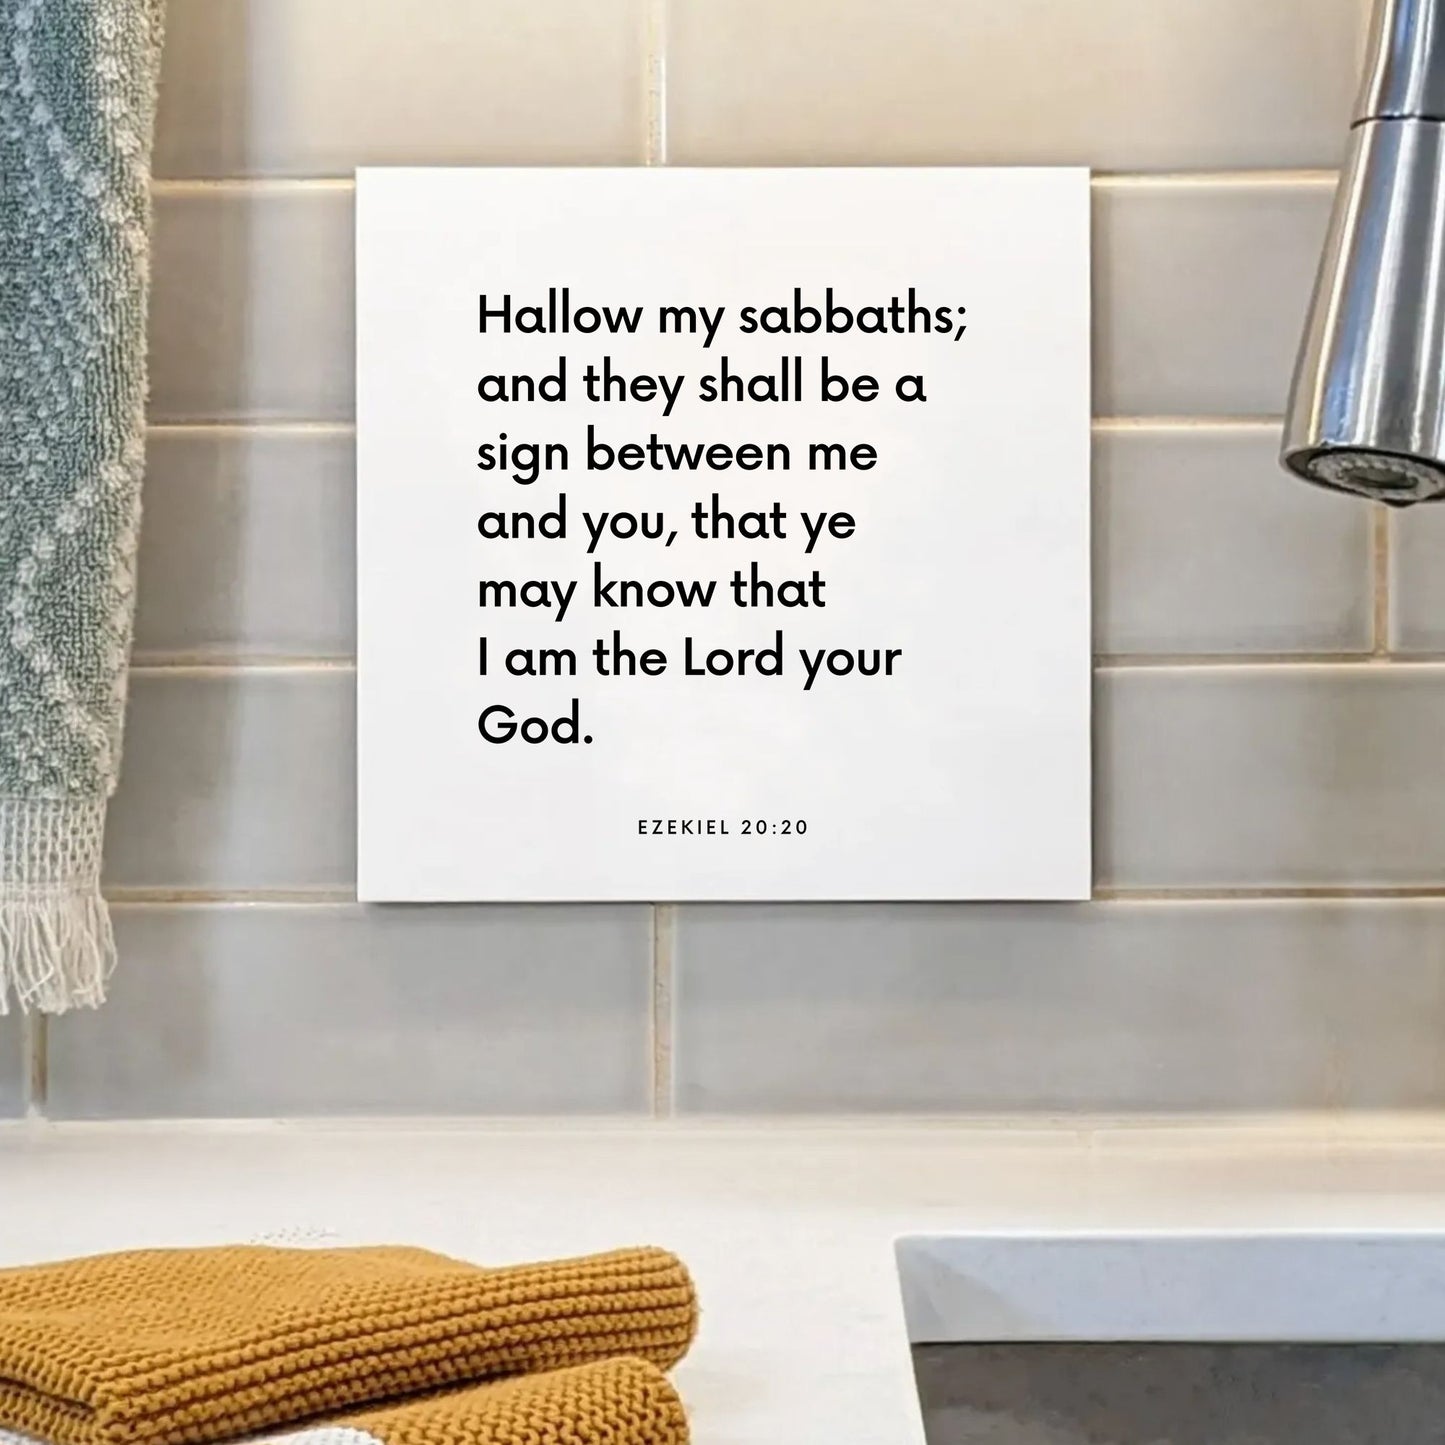 Sink mouting of the scripture tile for Ezekiel 20:20 - "Hallow my sabbaths; and they shall be a sign"